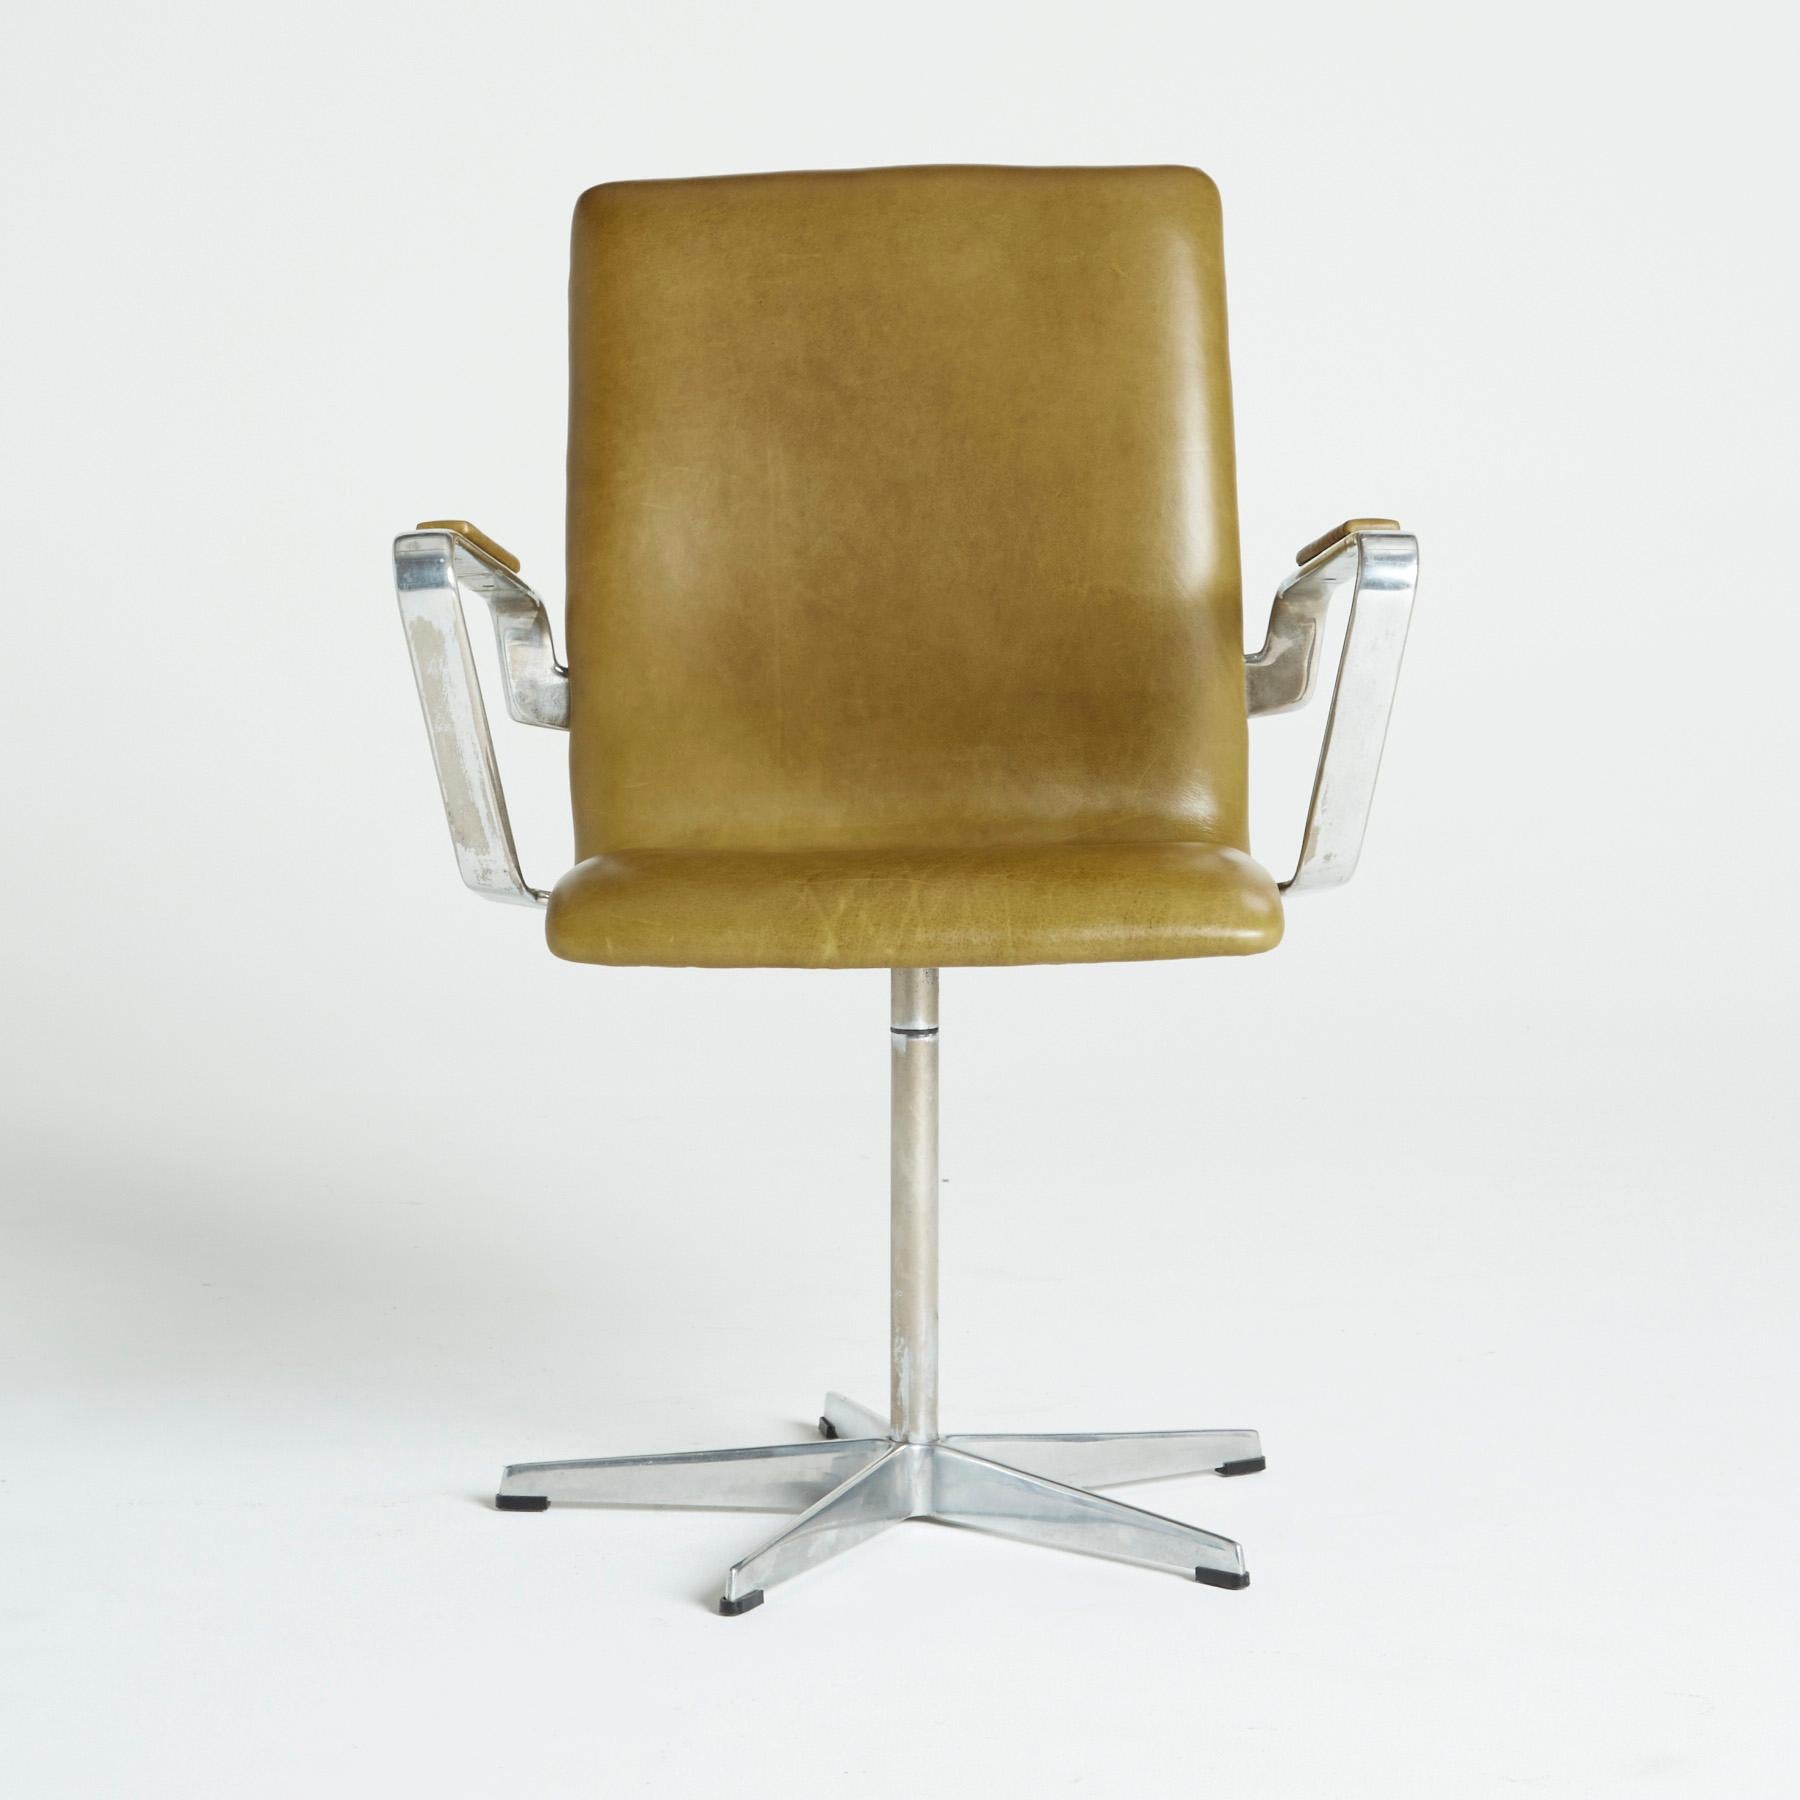 Model 3271 Oxford chairs designed by Arne Jacobsen for Fritz Hansen in 1963 in excellent condition. This chair was produced in 1973 per the affixed Fritz Hansen label.

*NOTE* Only one (1) chair is still available from the set of six that we